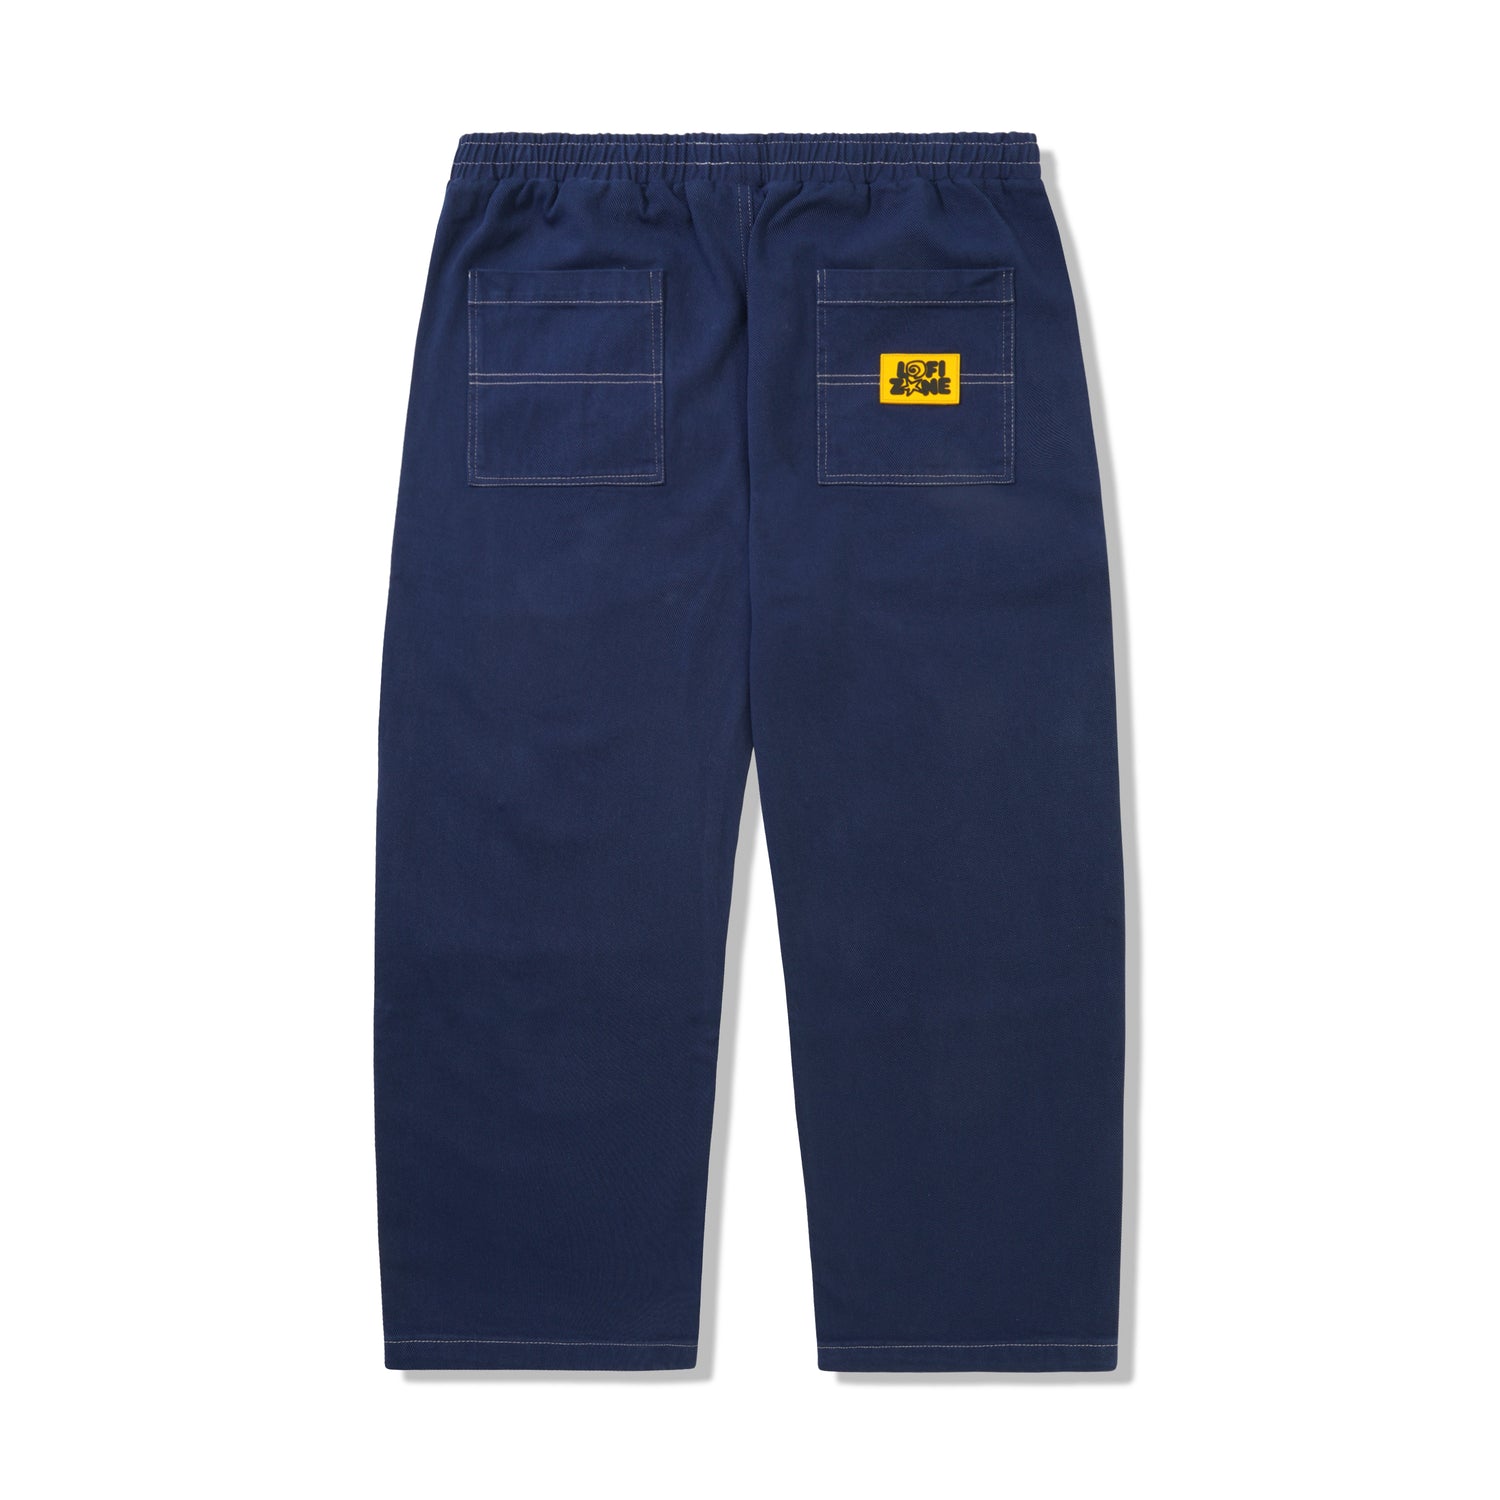 Easy Washed Pants, Washed Steel